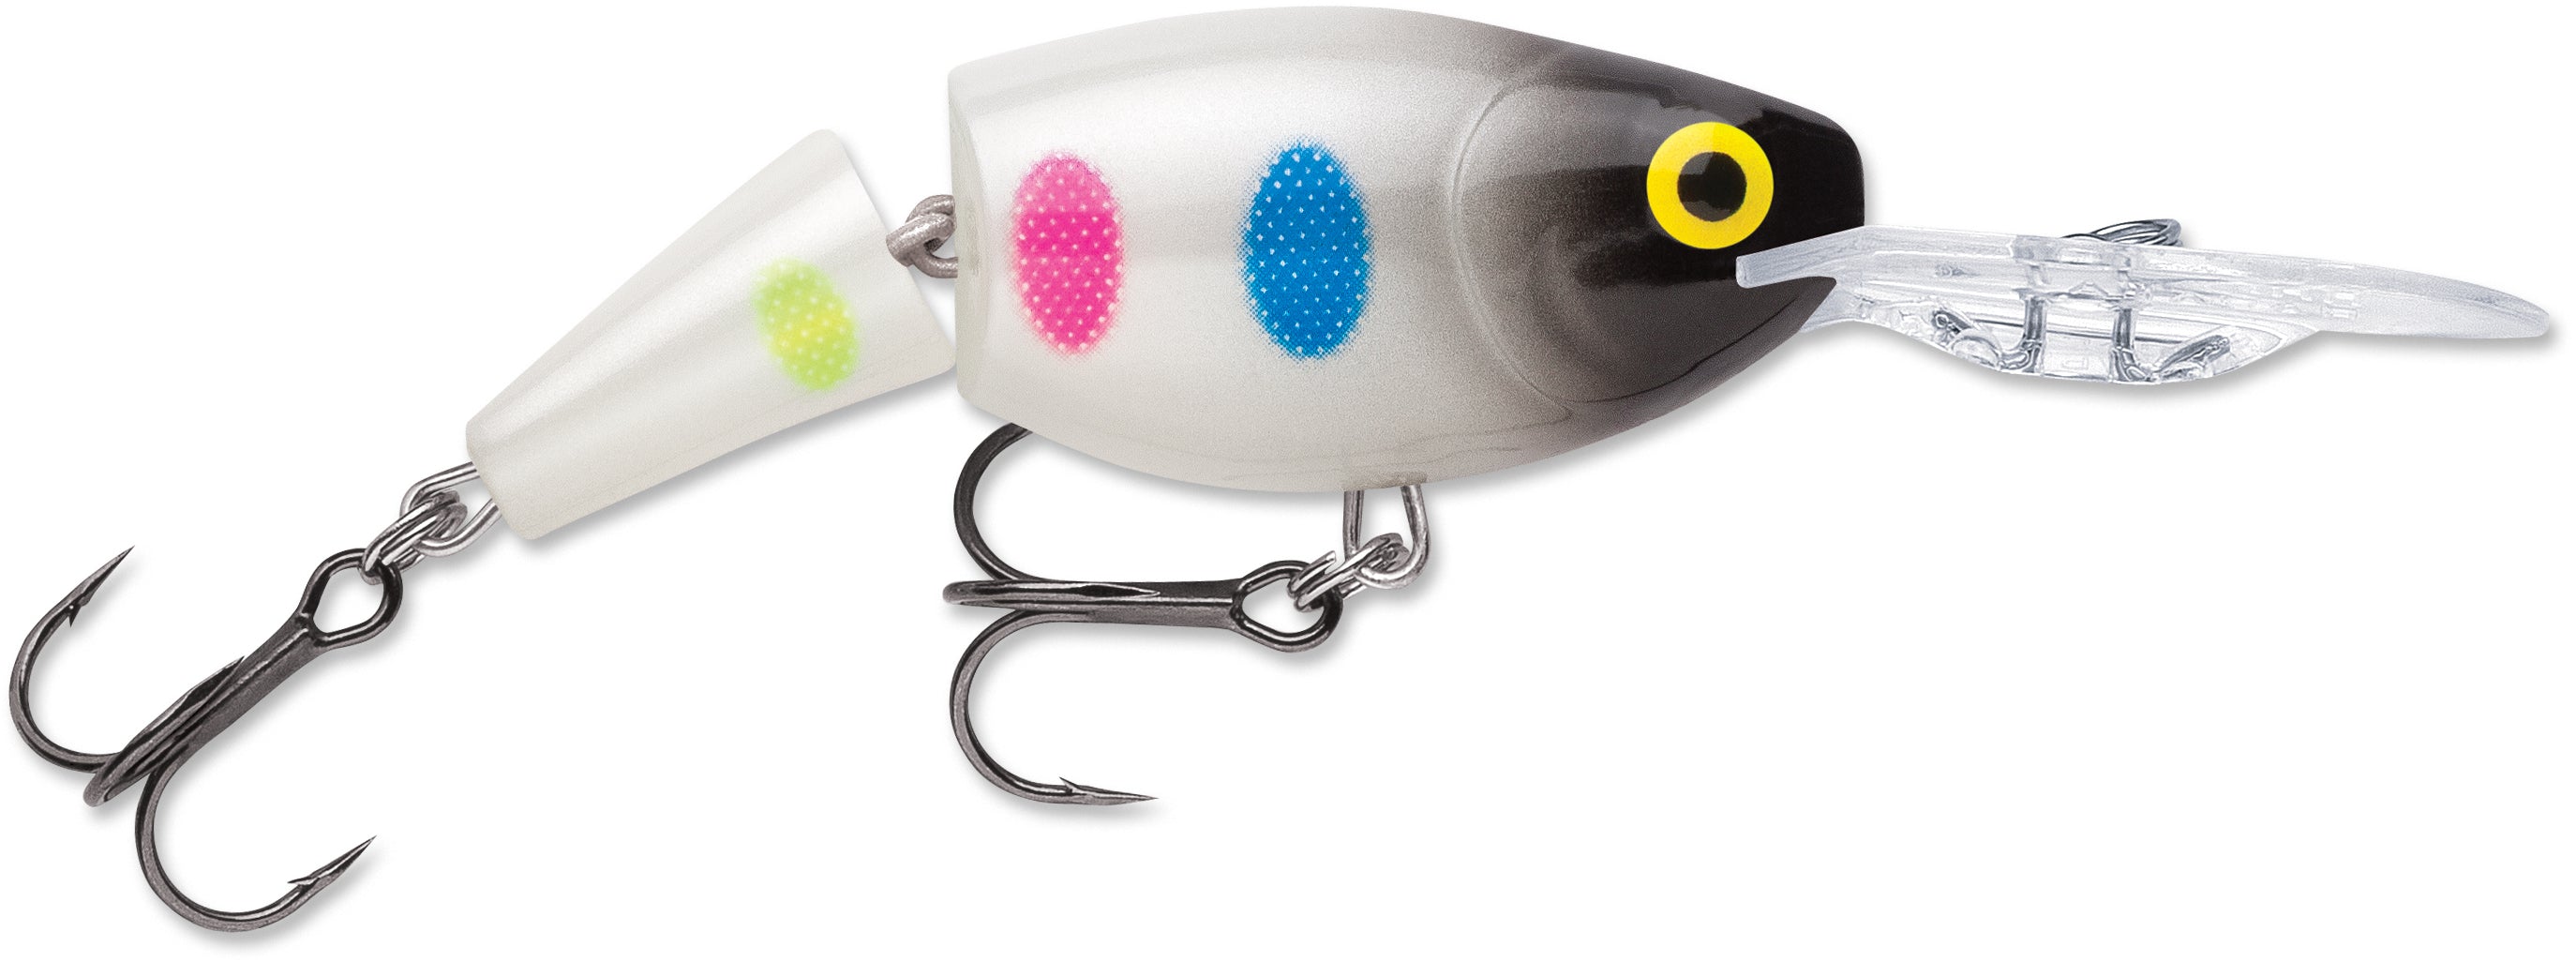  Rapala Jointed 07 Fishing lure, 2.75-Inch, Brook Trout :  Fishing Bait Traps : Sports & Outdoors